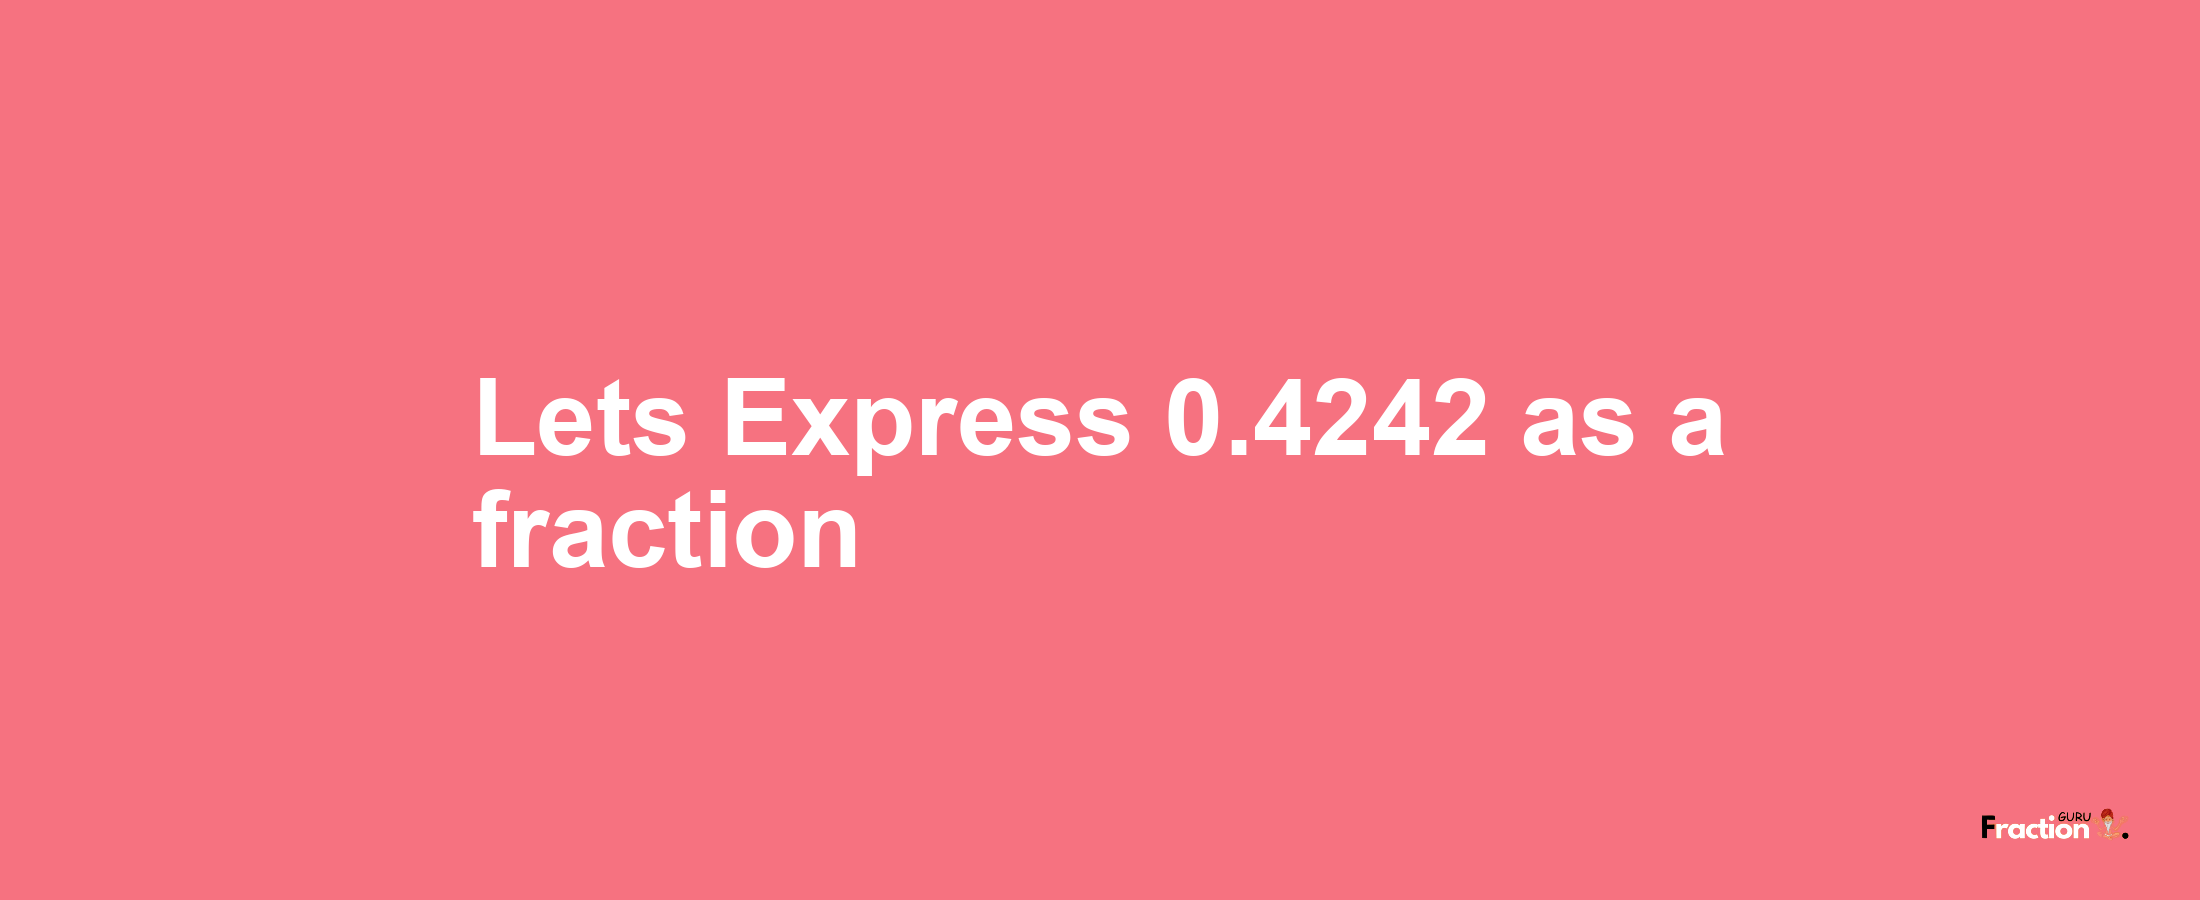 Lets Express 0.4242 as afraction